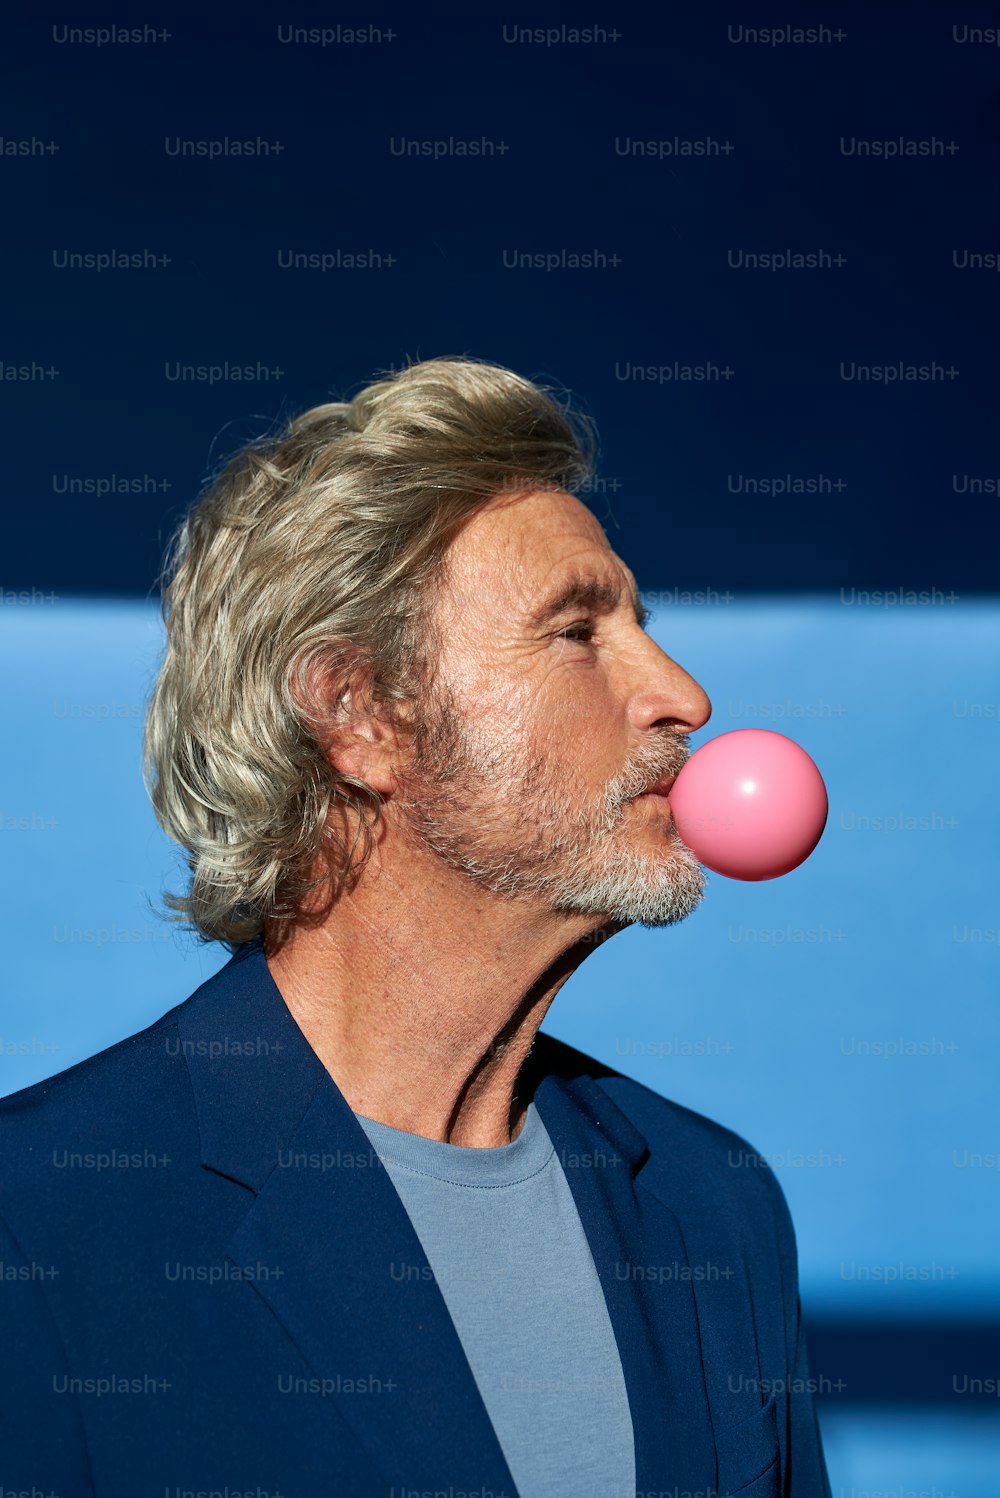 a man blowing a bubble with a pink bubble in his mouth